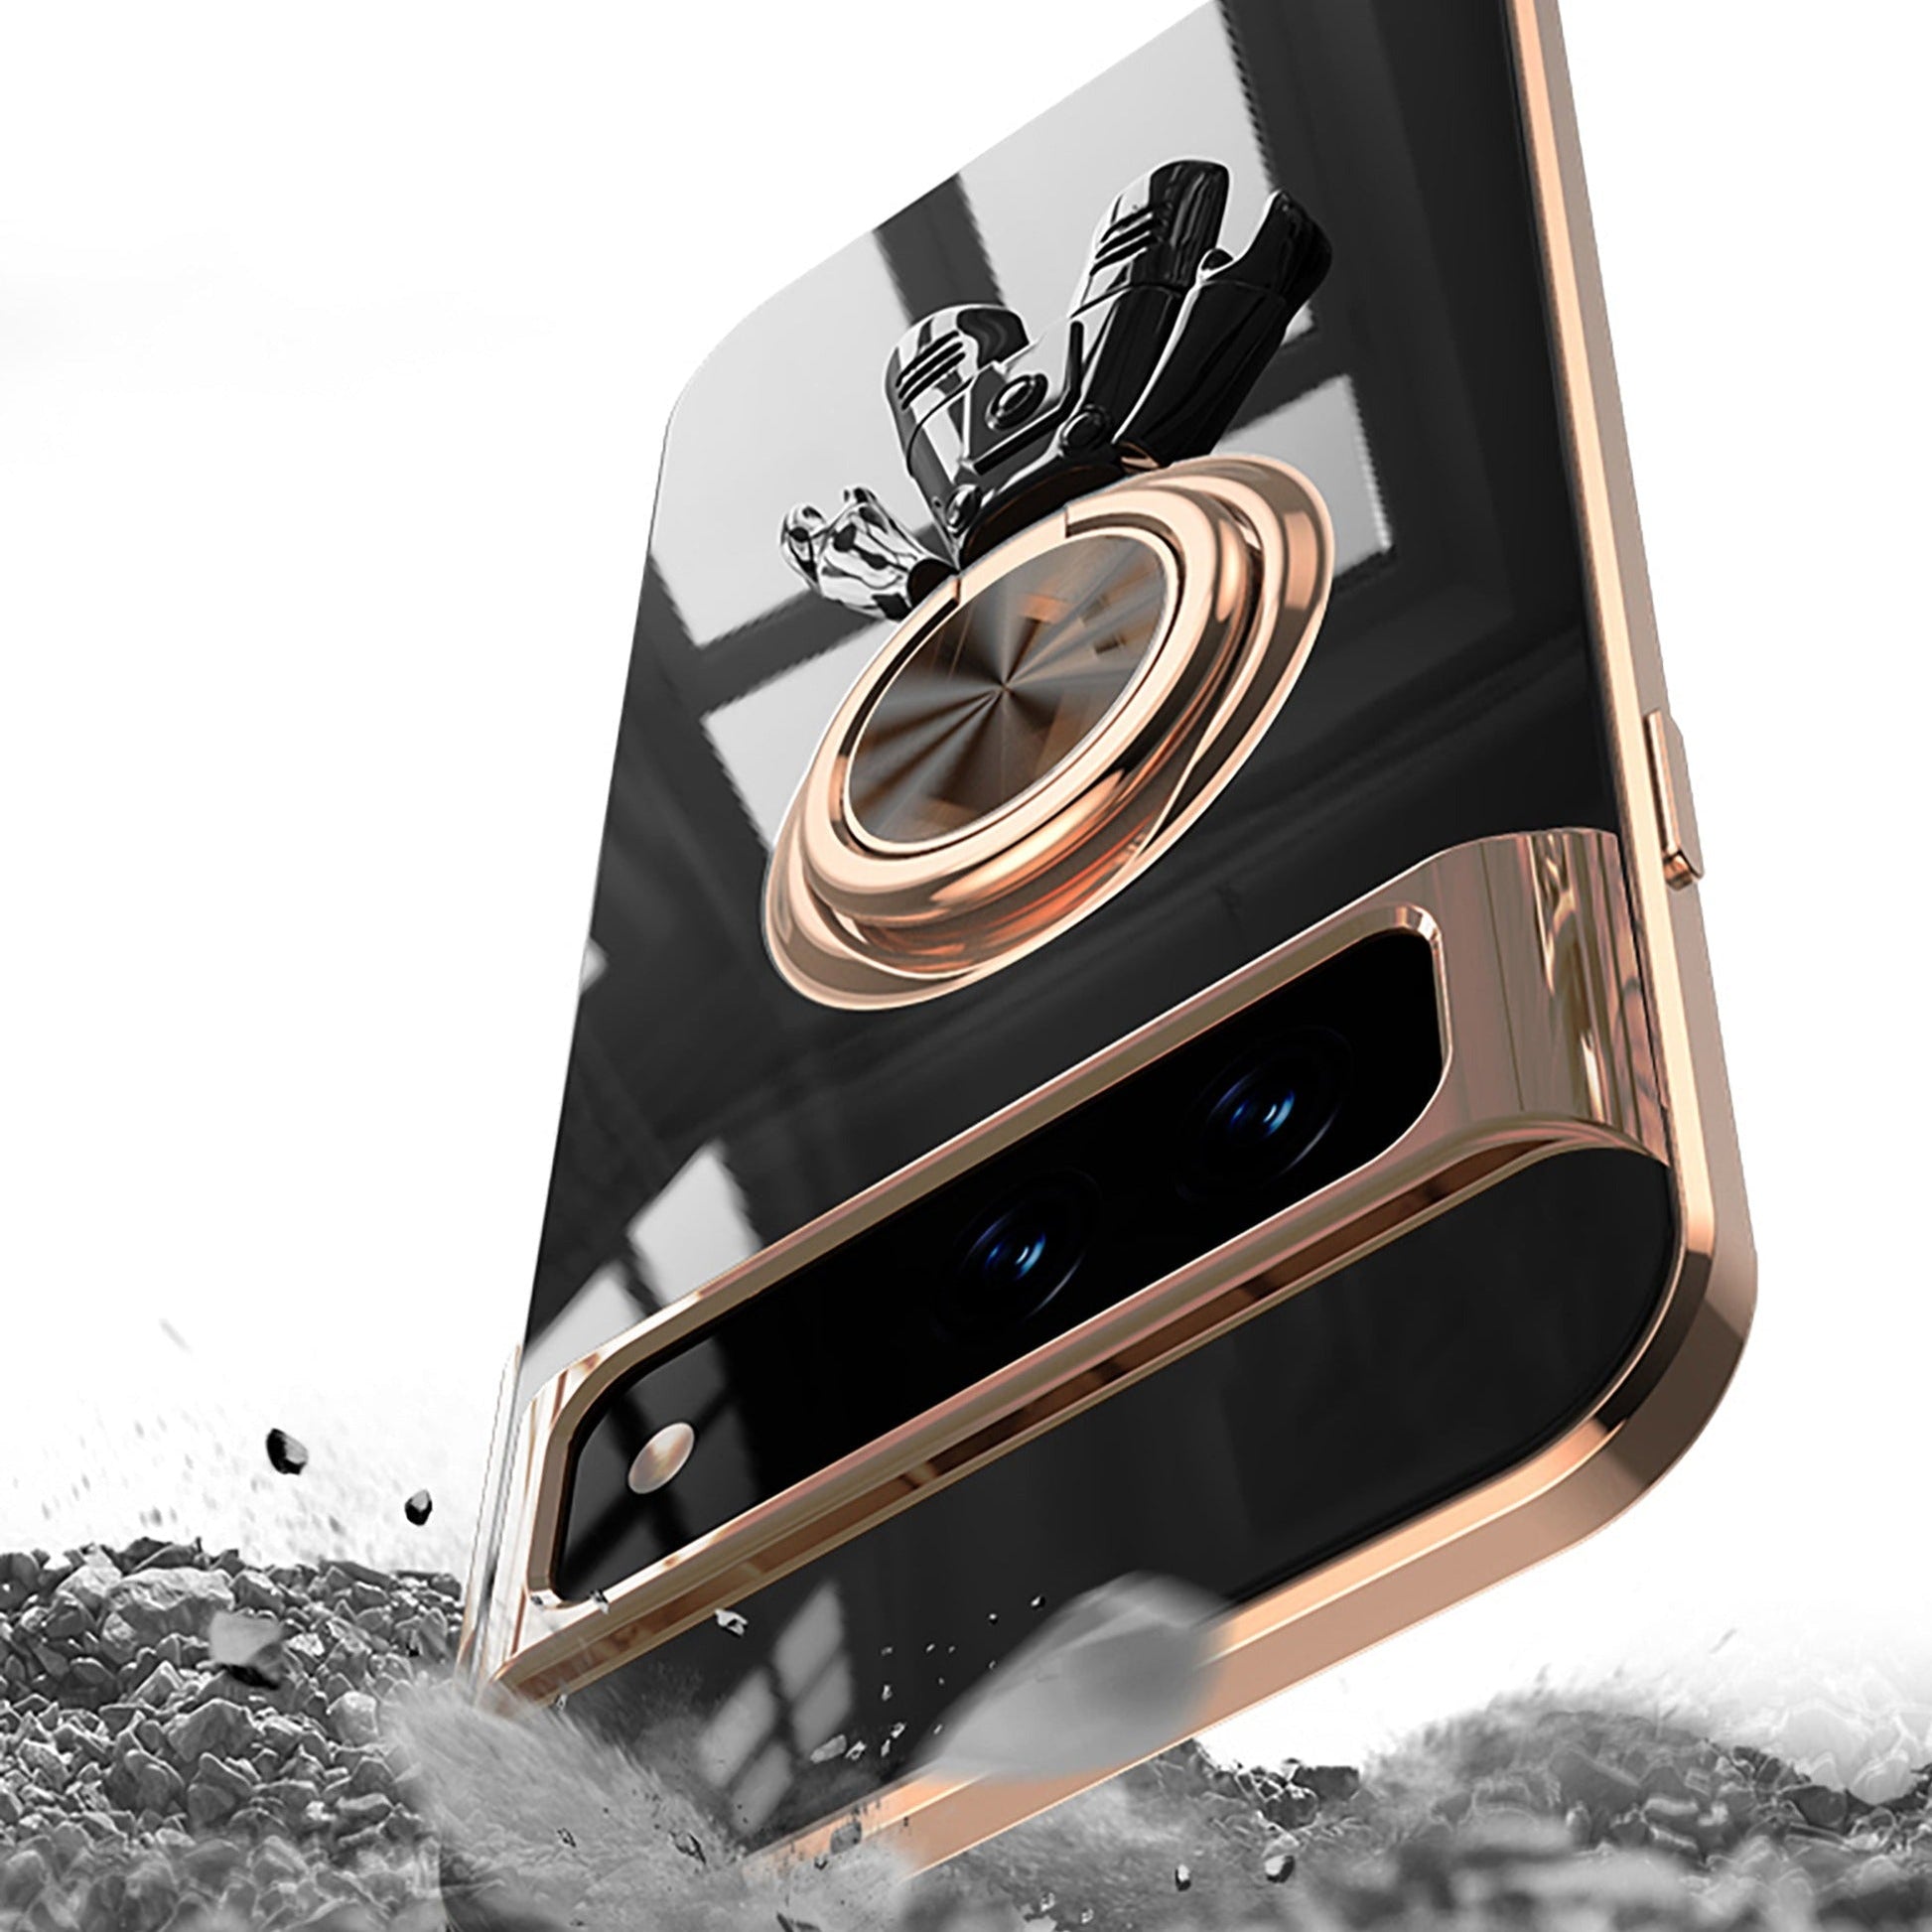 Astronaut Ring Stand Google Pixel Case - ChunkCase